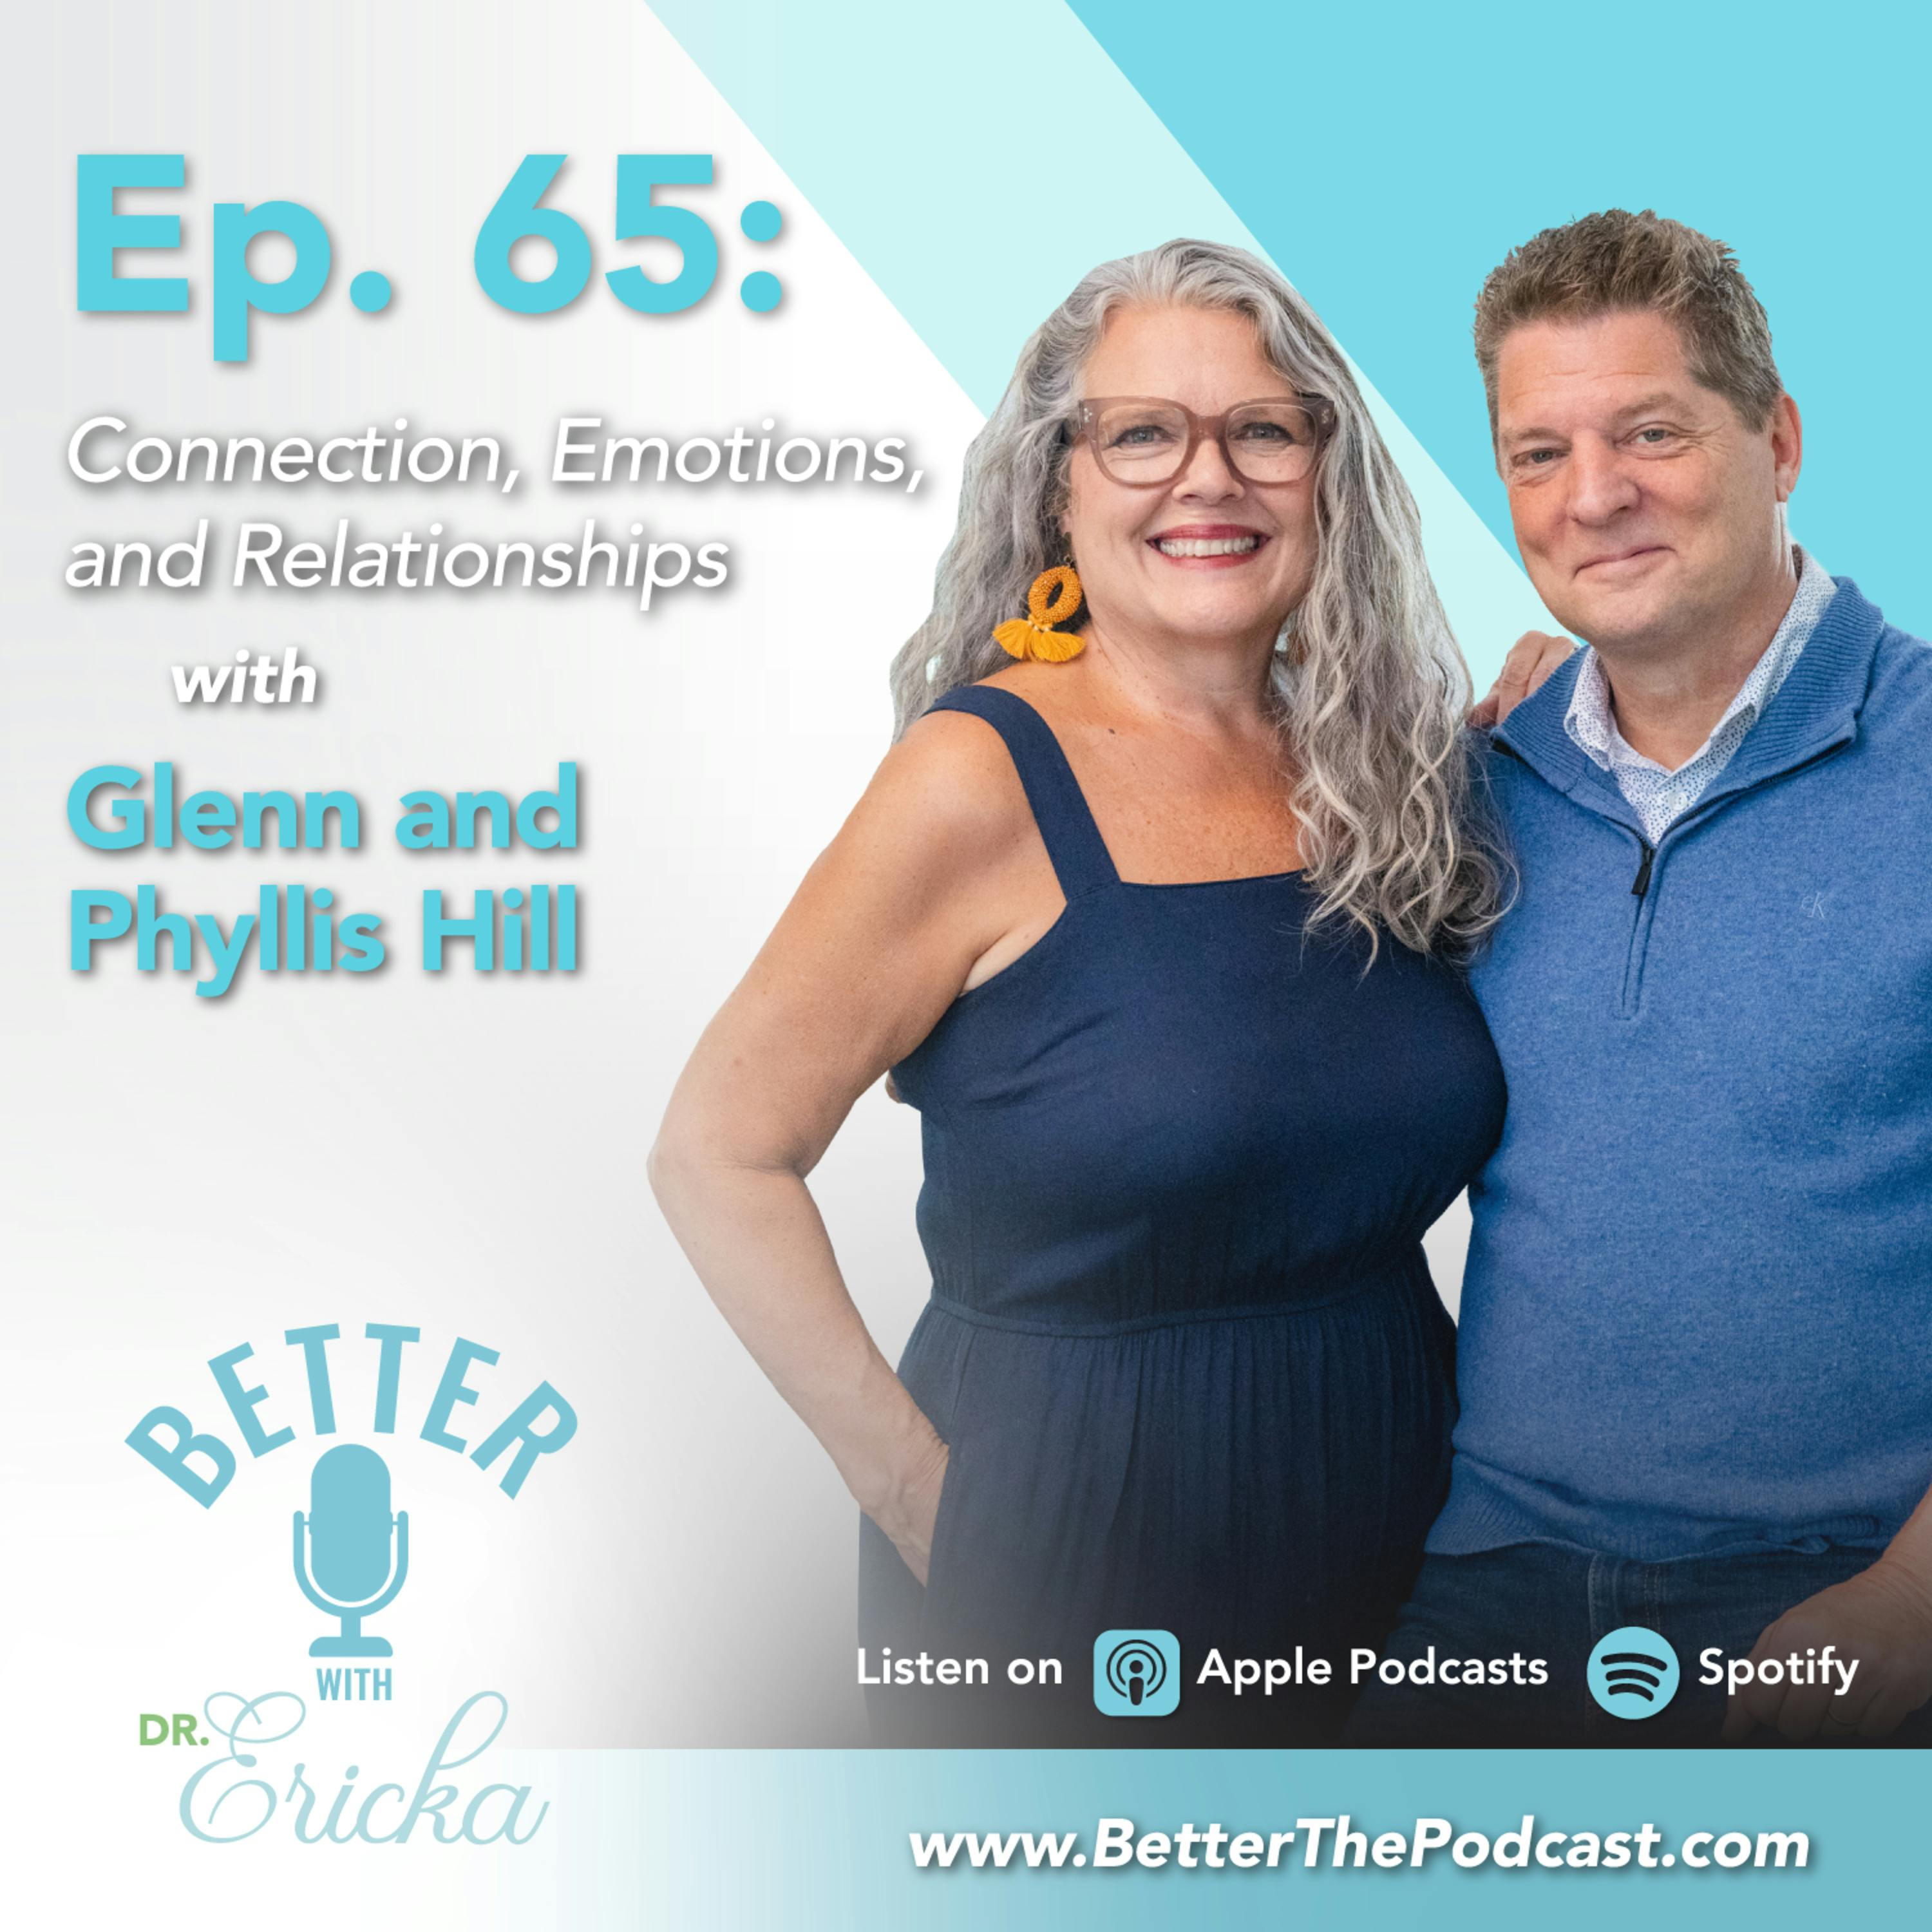 Connection, Emotions, and Relationships with Glenn and Phyllis Hill